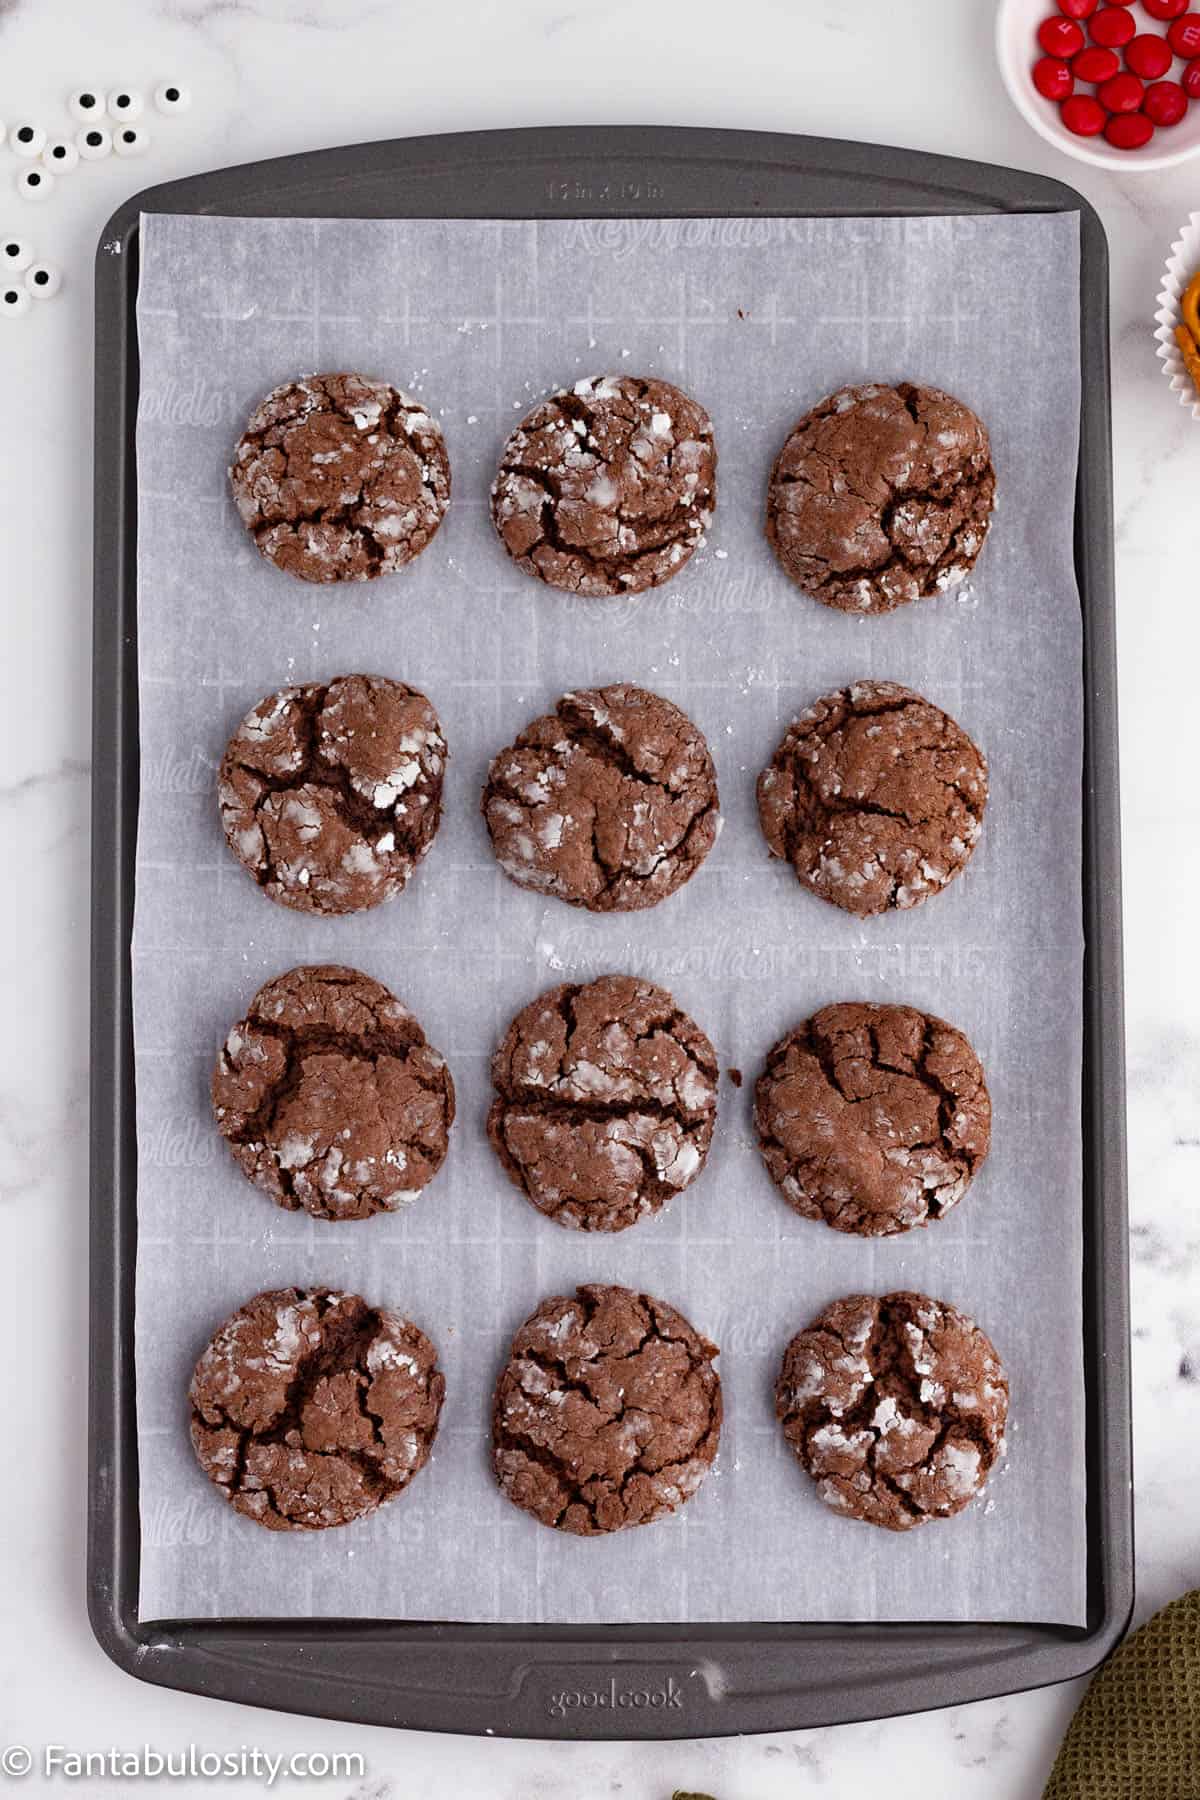 A metal baking sheet lined with parchment paper holds 12 baked chocolate cookies